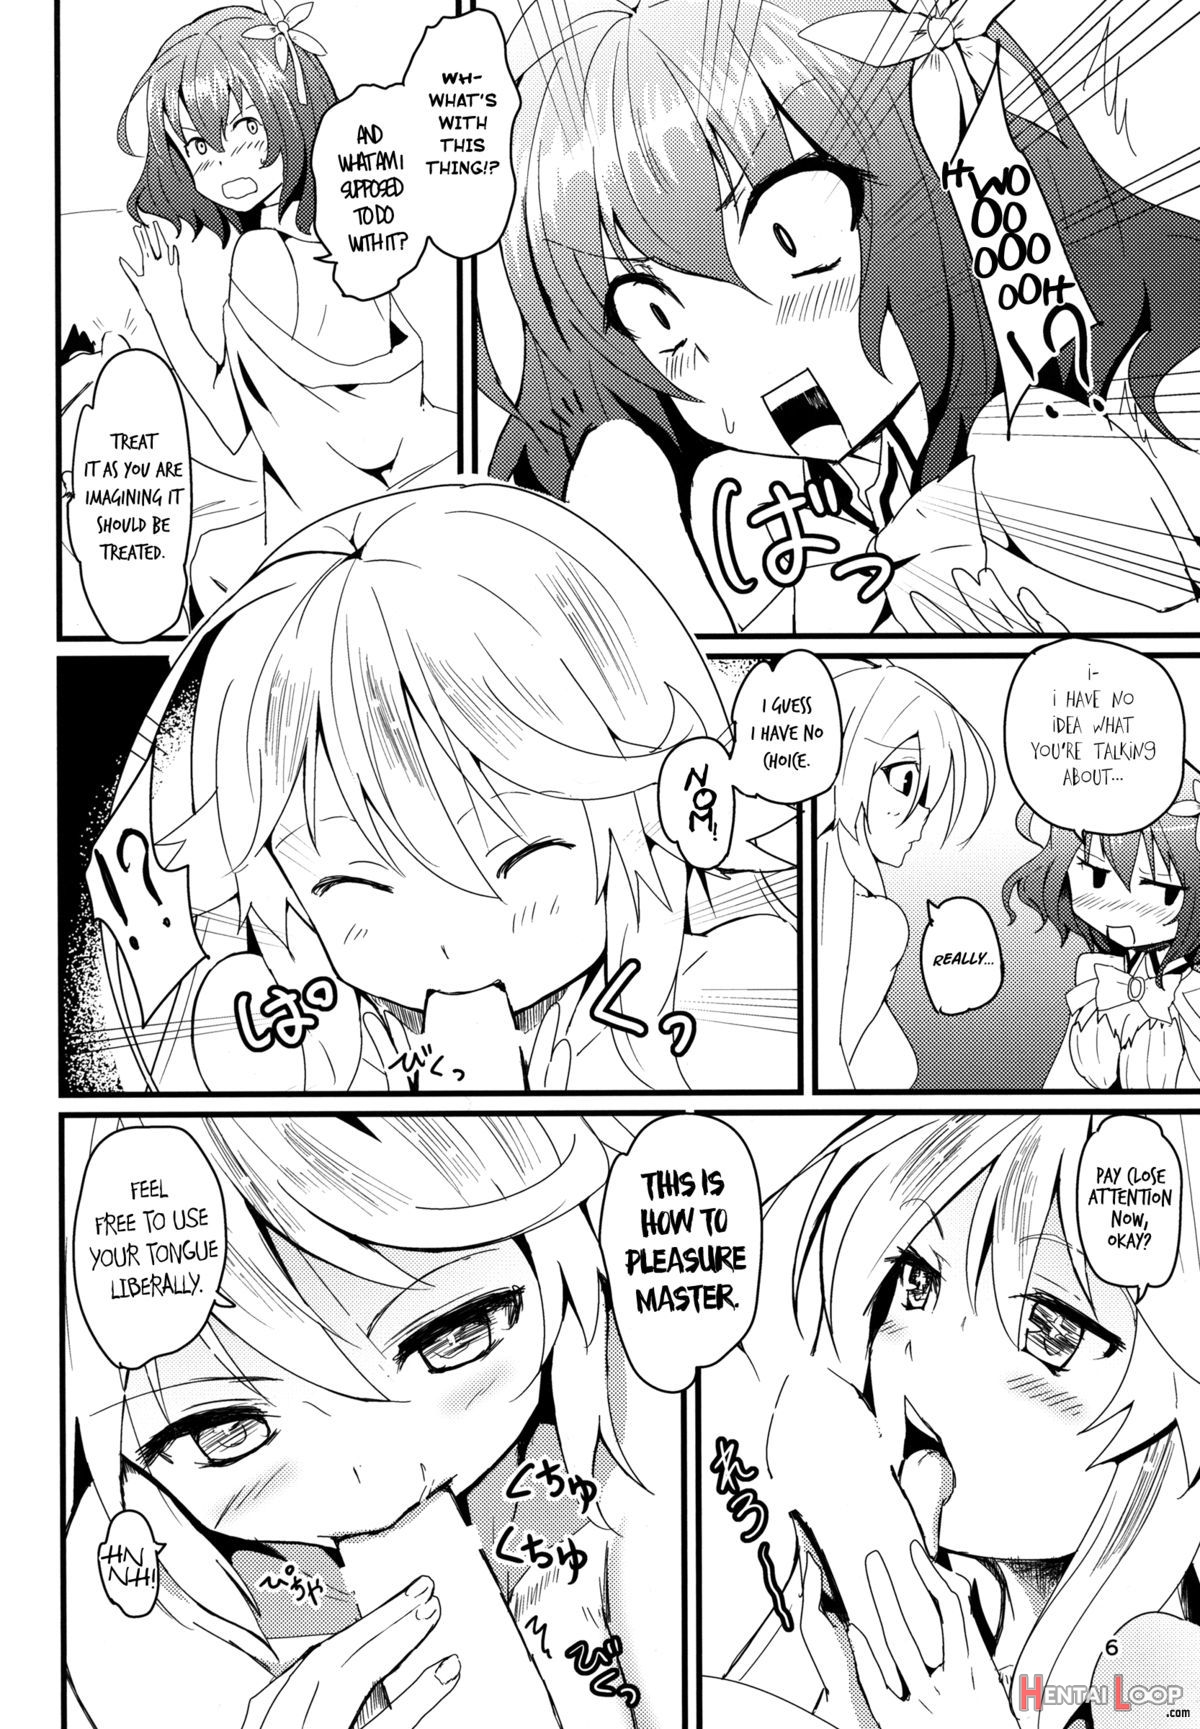 Jibril And Steph's Attempts At Service page 6